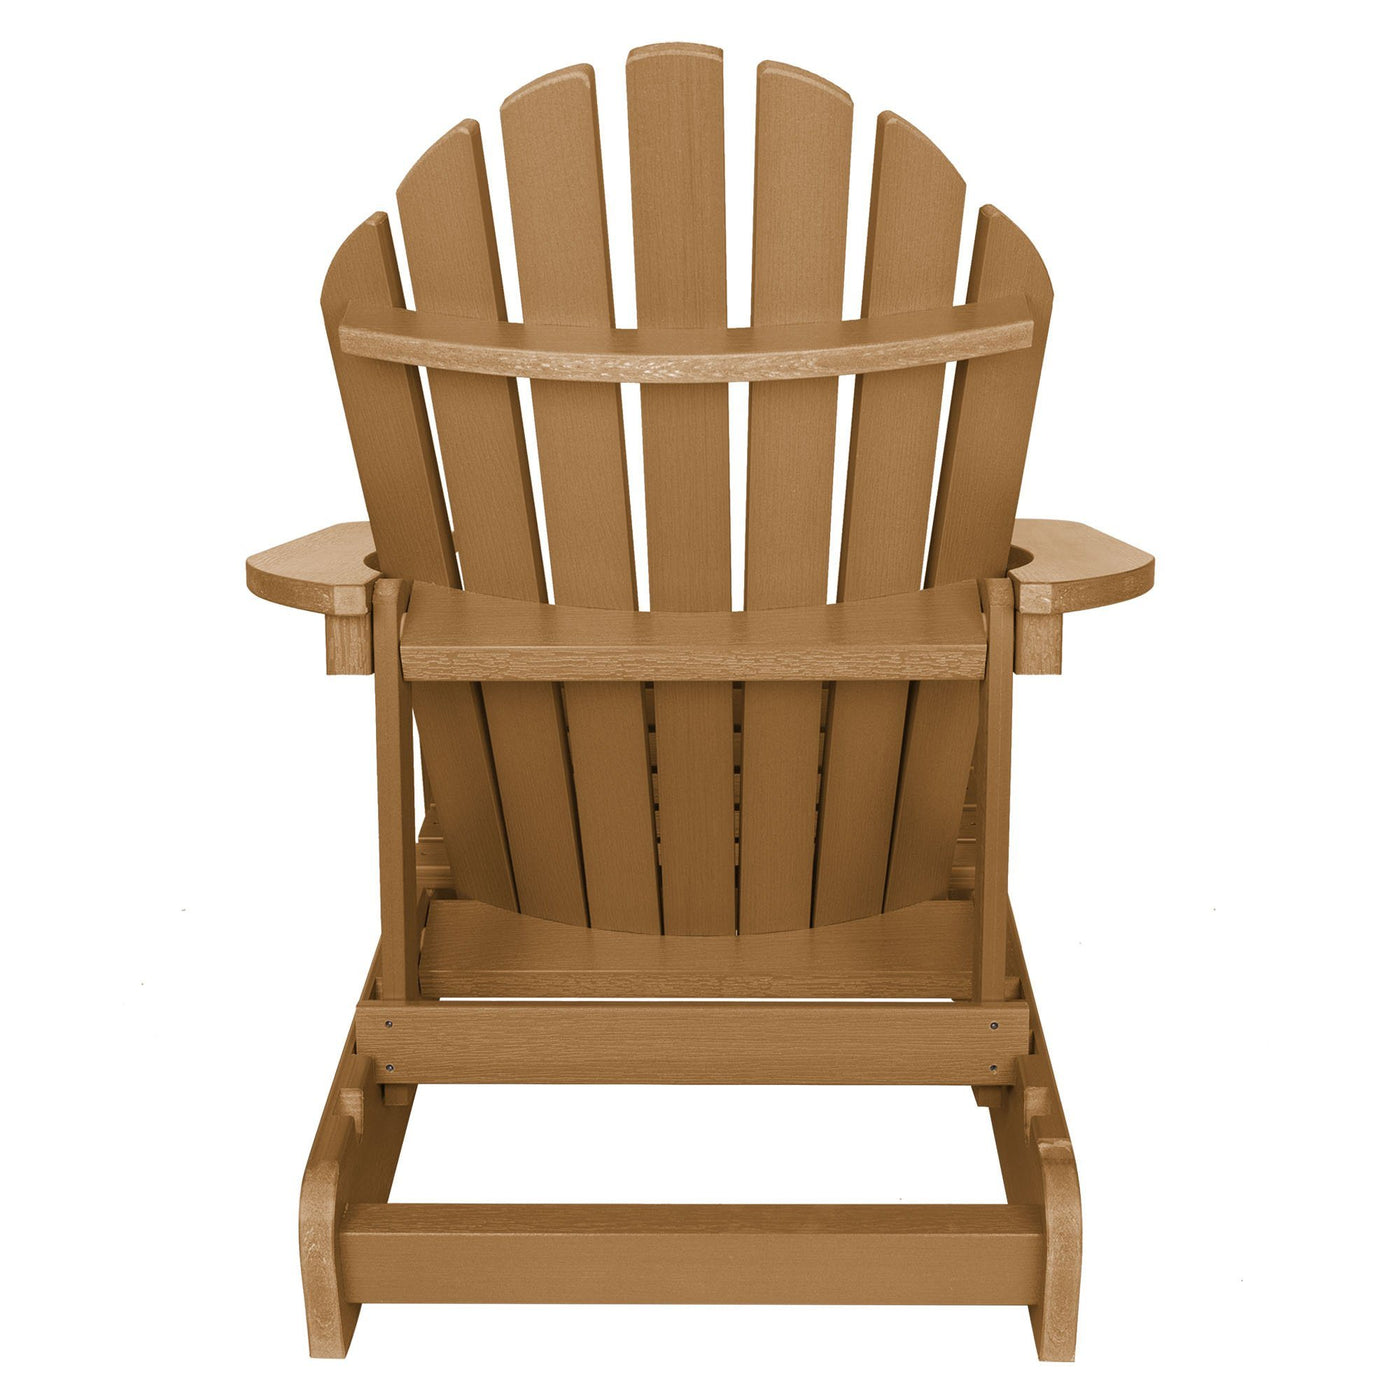 Back view of Hamilton Adirondack chair in Toffee brown